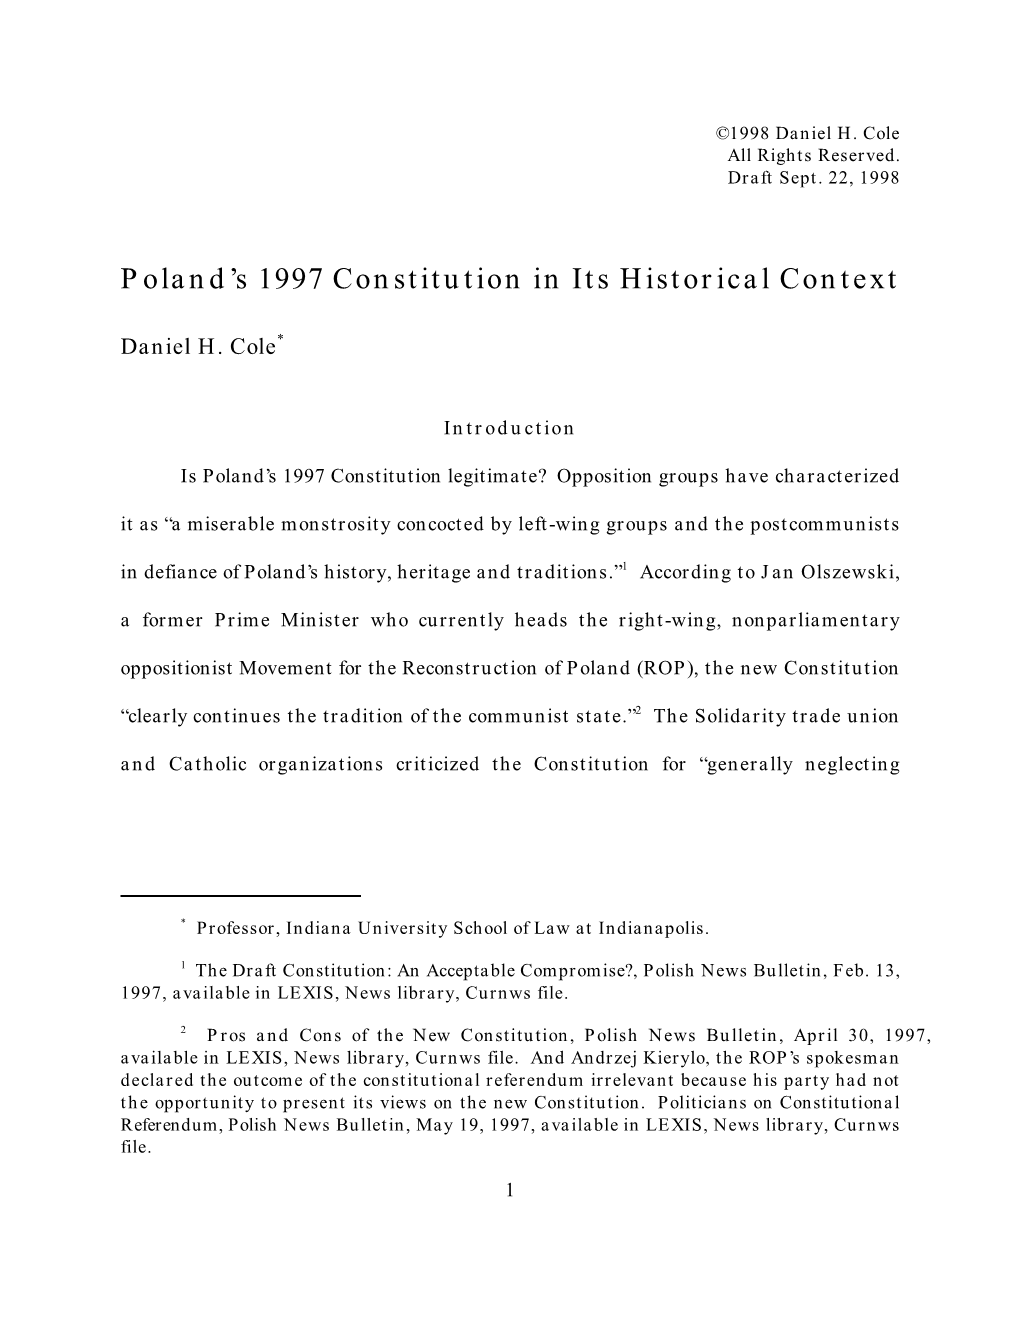 Poland's 1997 Constitution in Its Historical Context